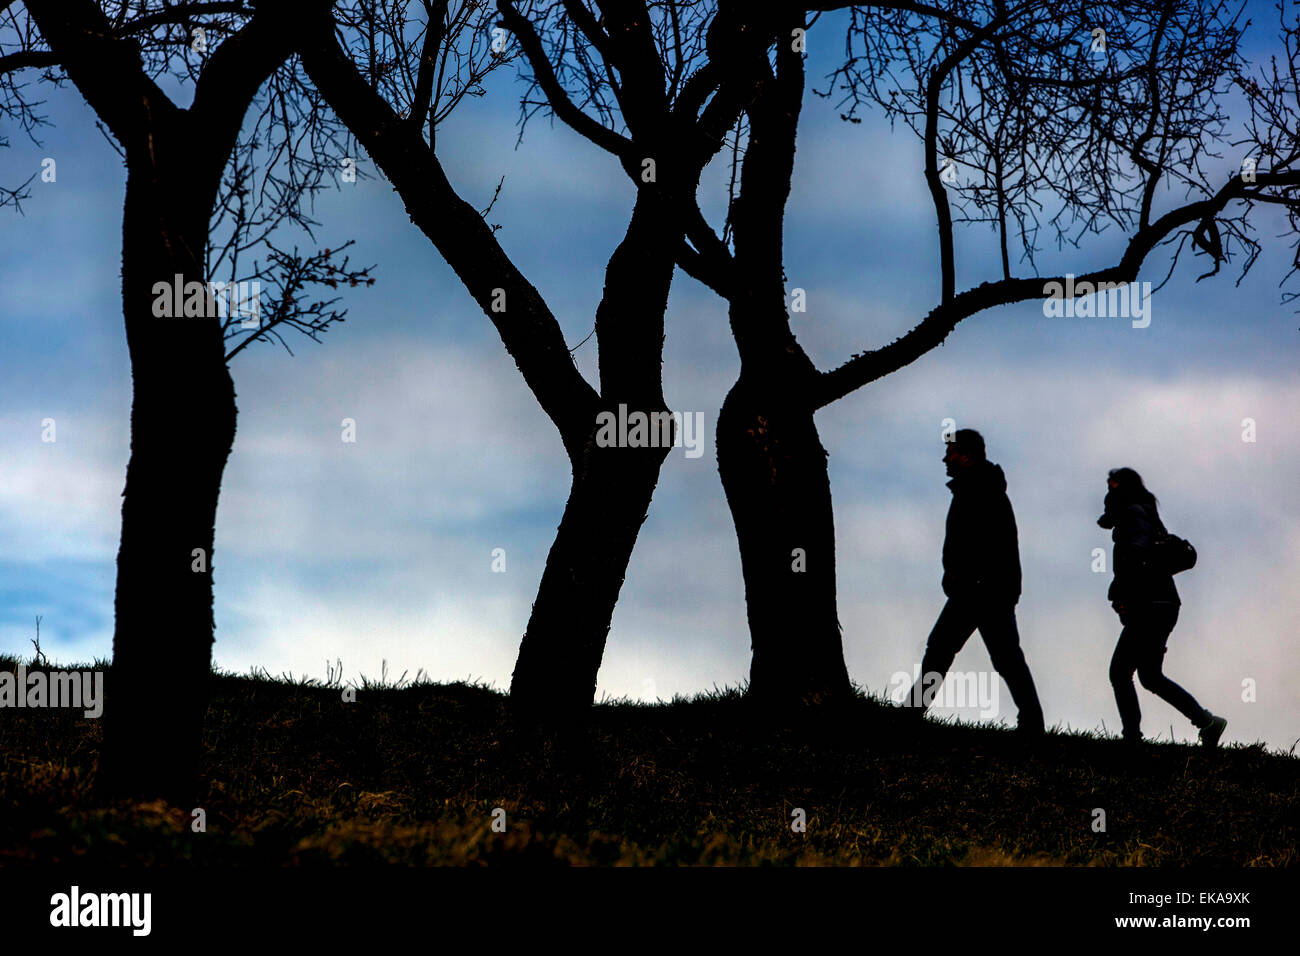 silhouettes of people in the orchard trees without leaves Stock Photo